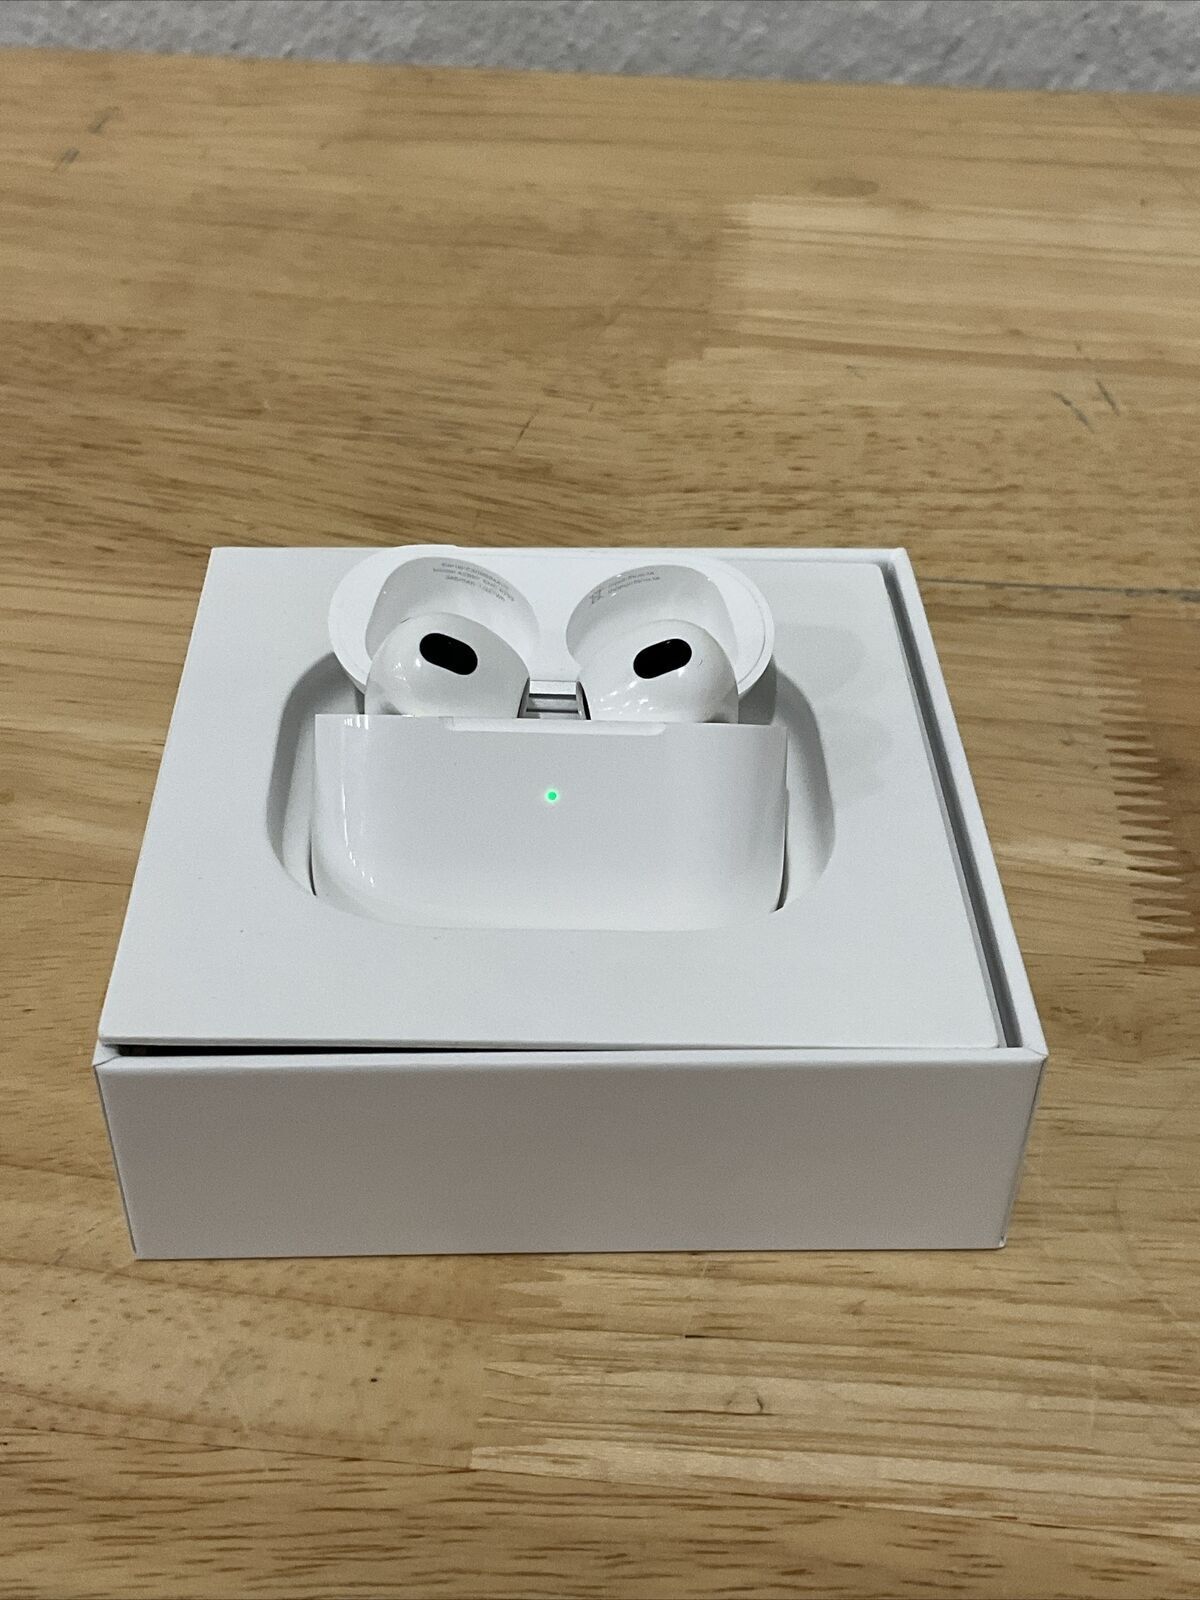 Apple AirPods 3rd Generation Wireless Earbuds with Charging Case - Fast Shipping